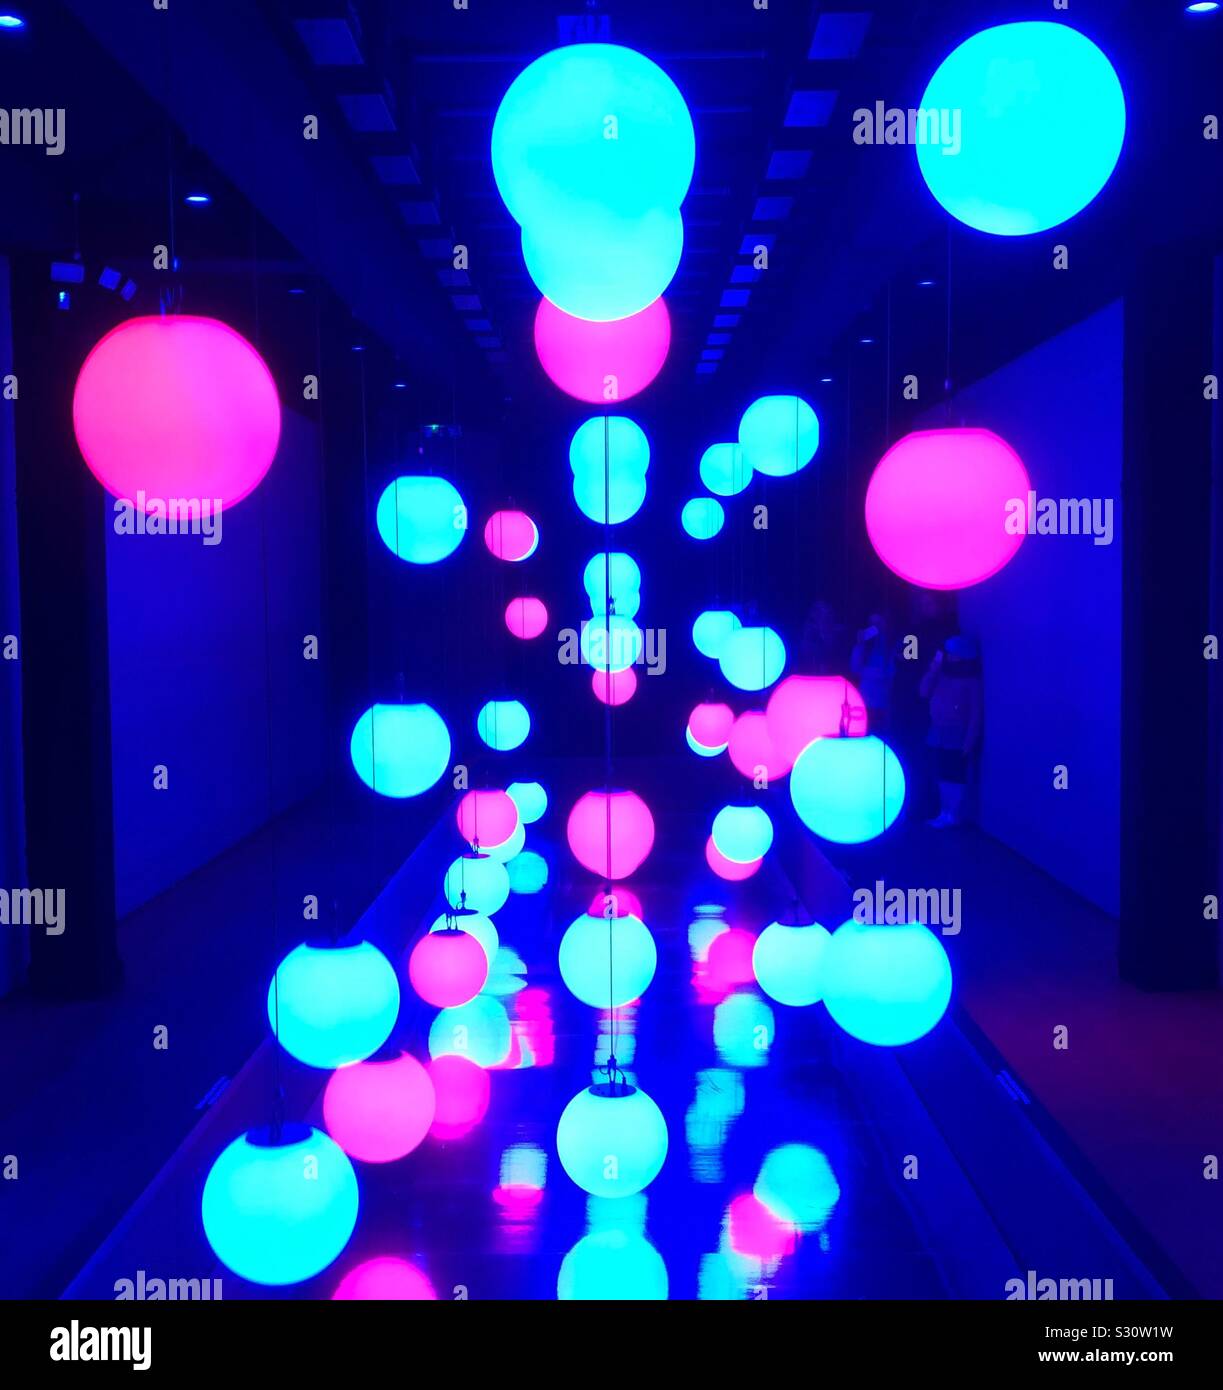 Art installation and kinetic light sculpture for Christmas with lighted orbs raised and lowered to form patterns to music. Stock Photo